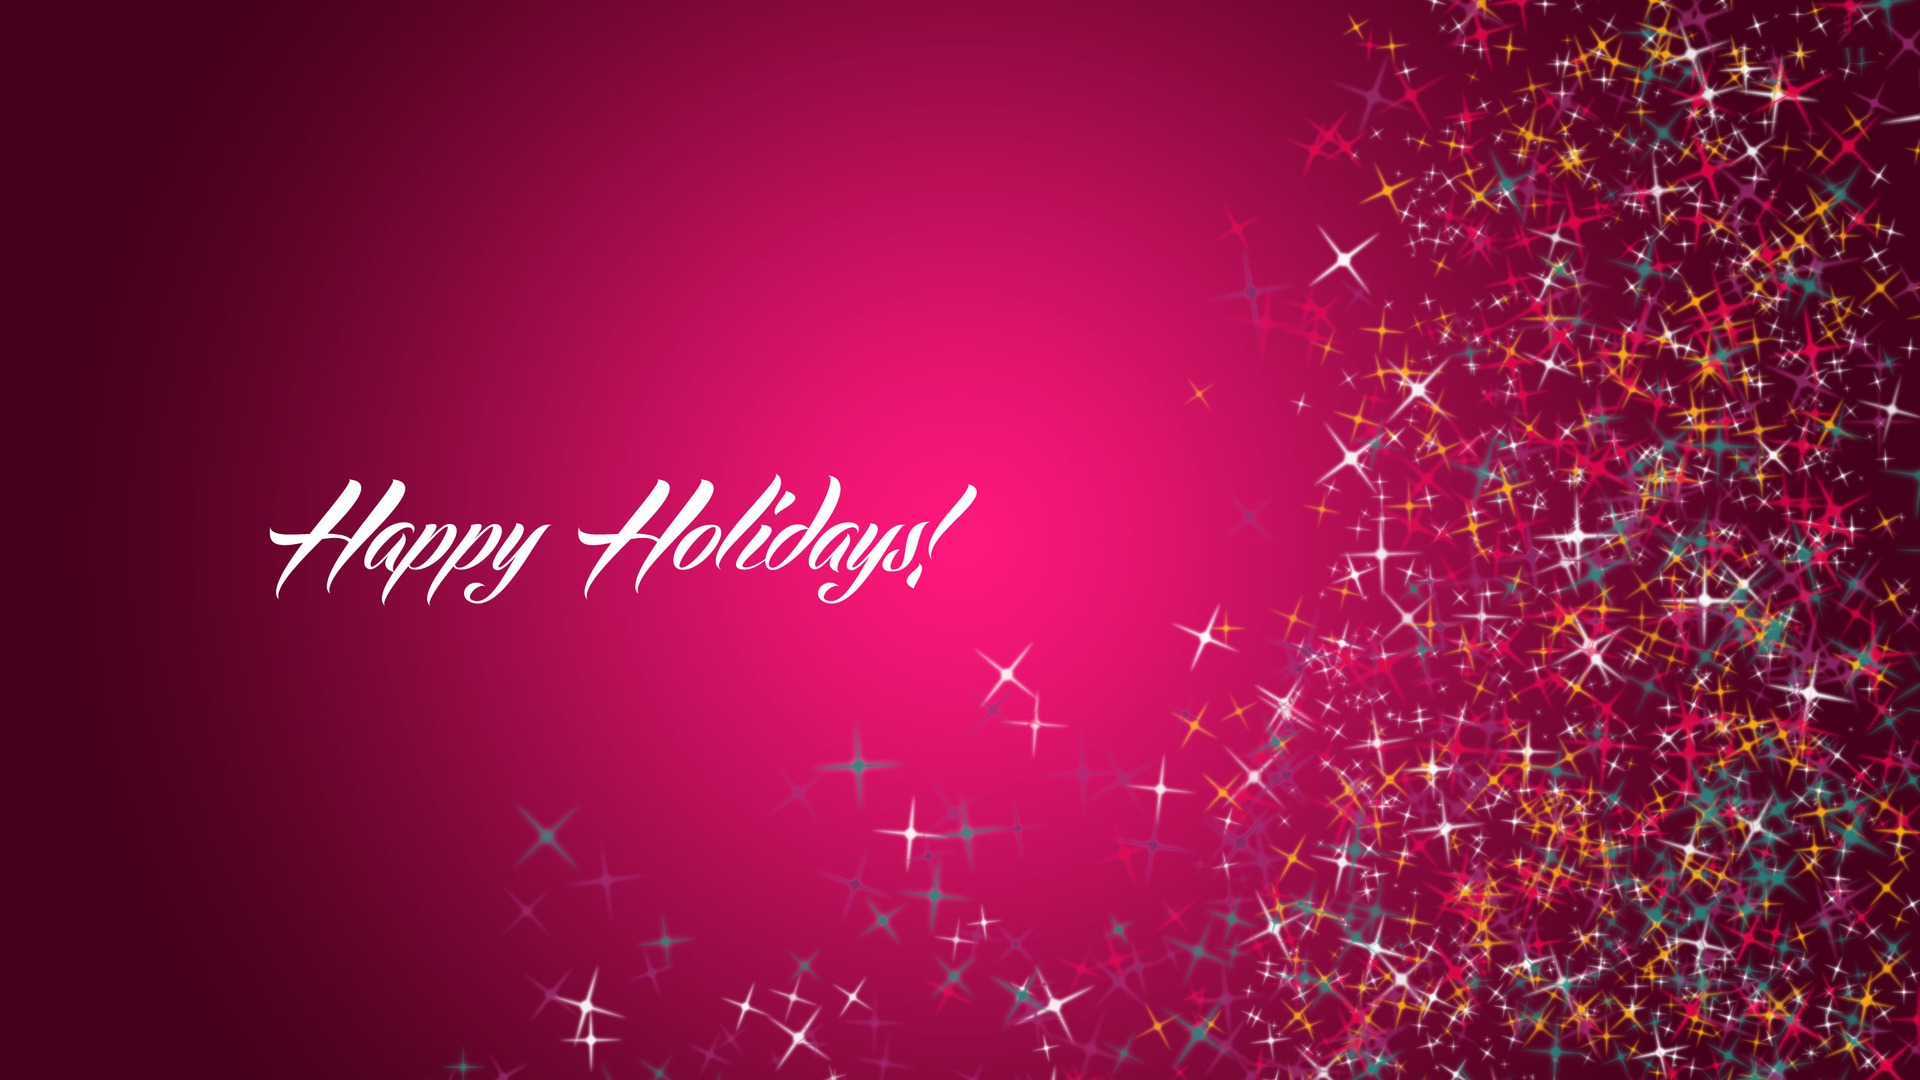 Download Holiday HD Wallpapers Free 